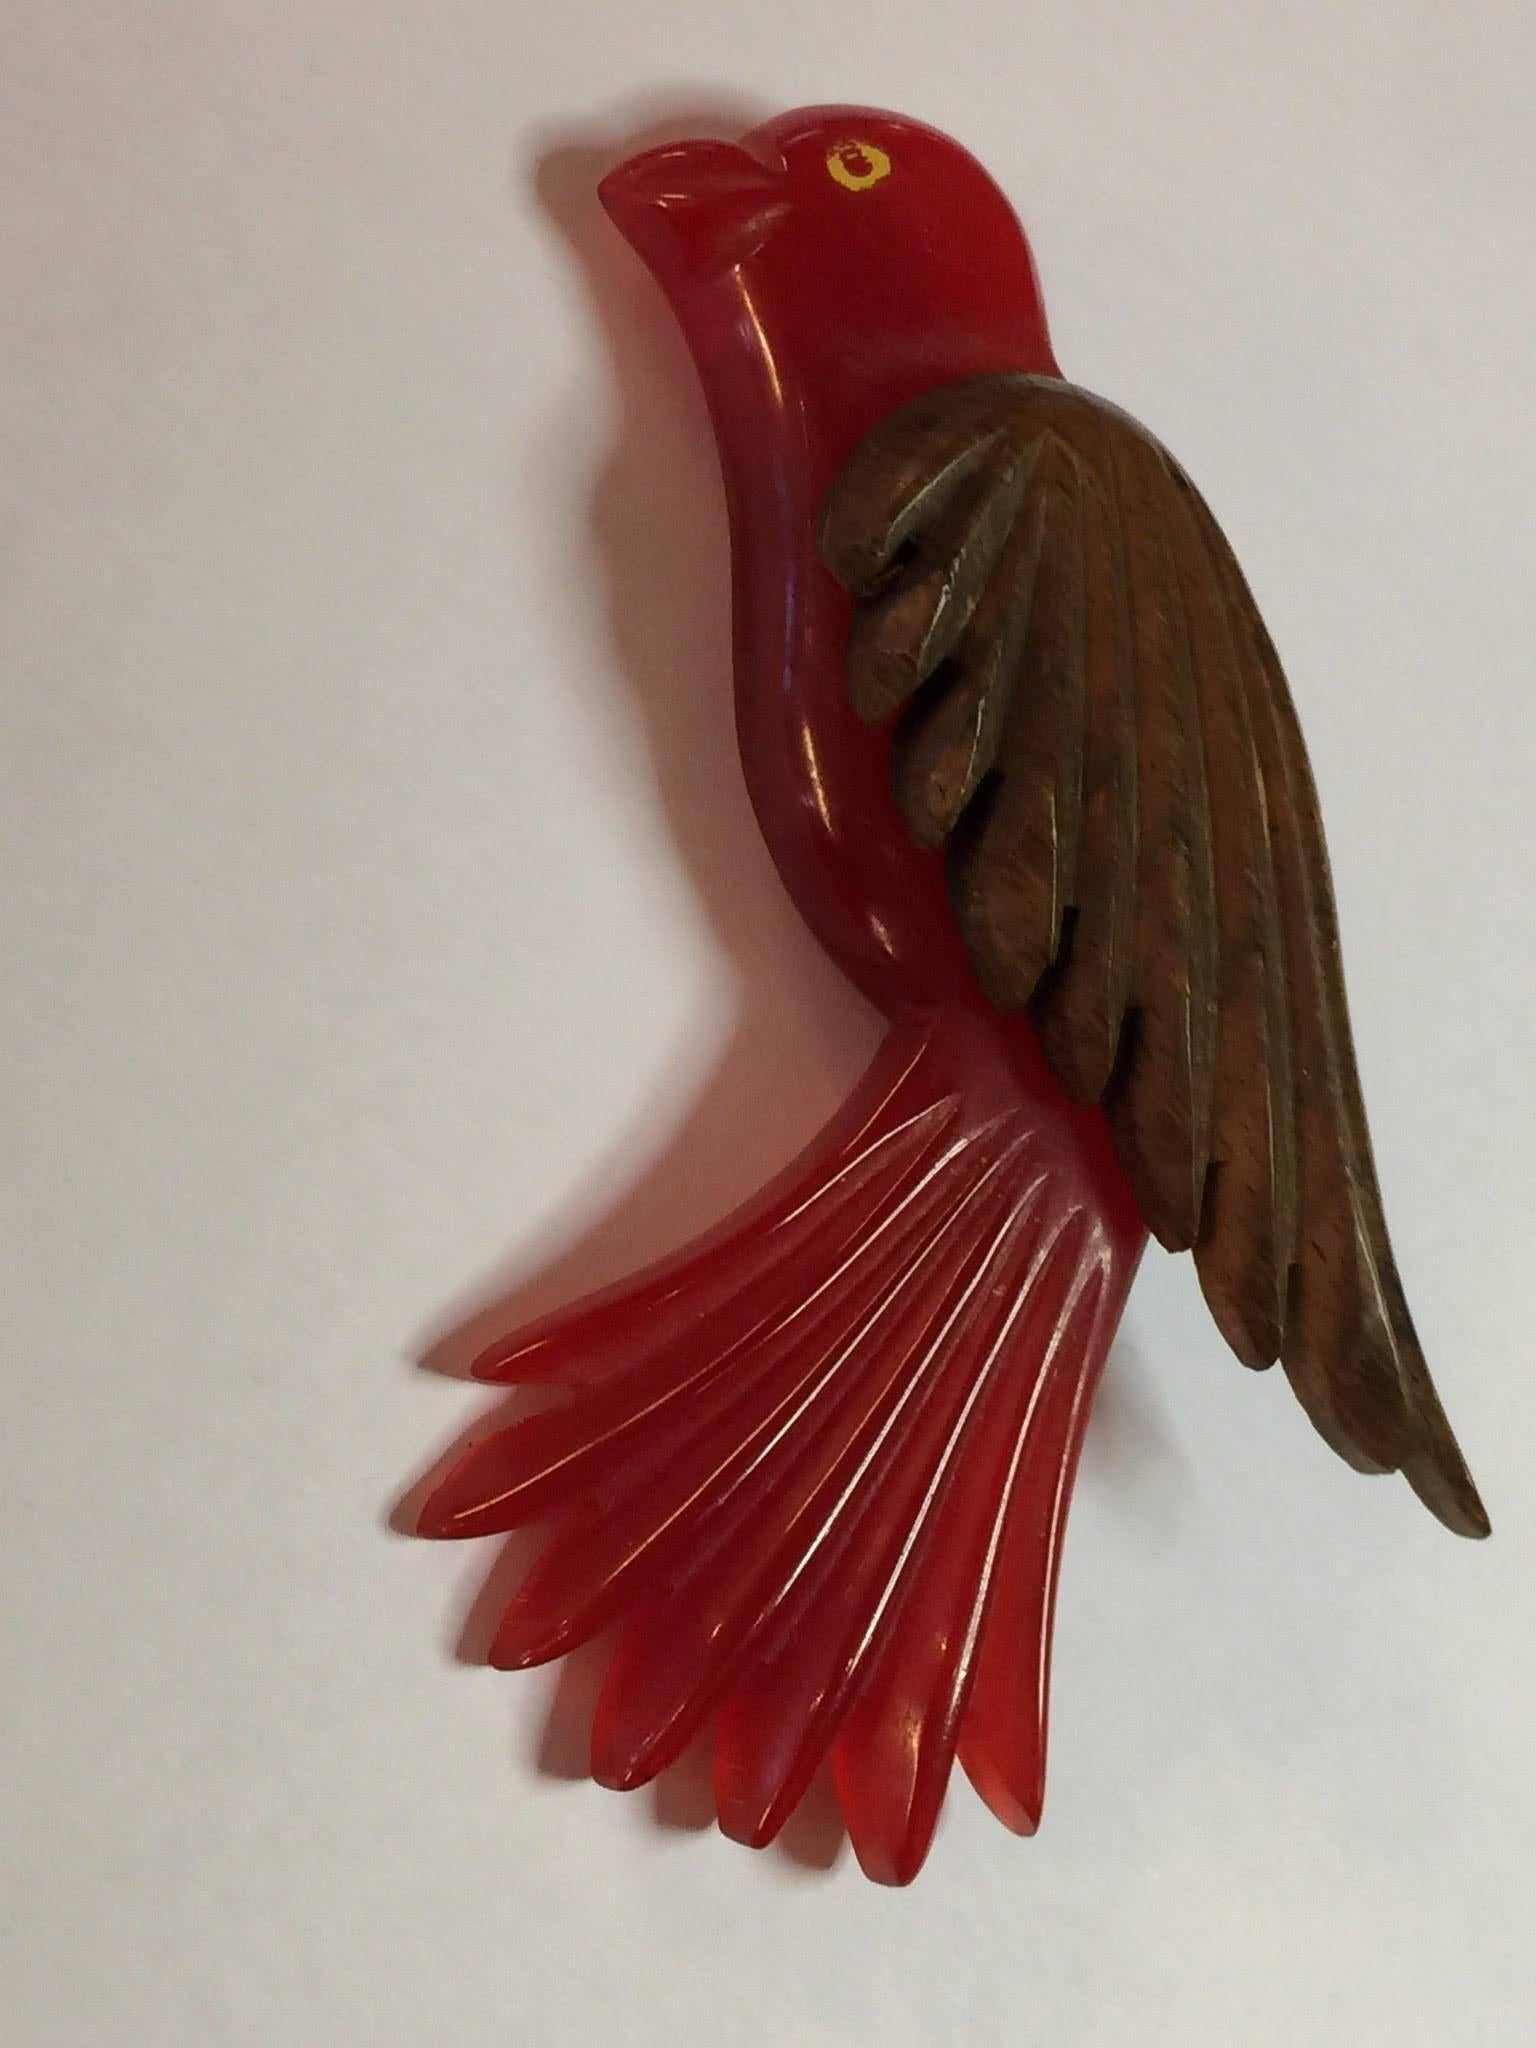 This fine example of the bakelite carver's art is actually a combination of bakelite and wood grommeted together: always a sporty and kicky combination! 1930s in origin, these wood laminated pins always showed off finesse and detail of carving, as